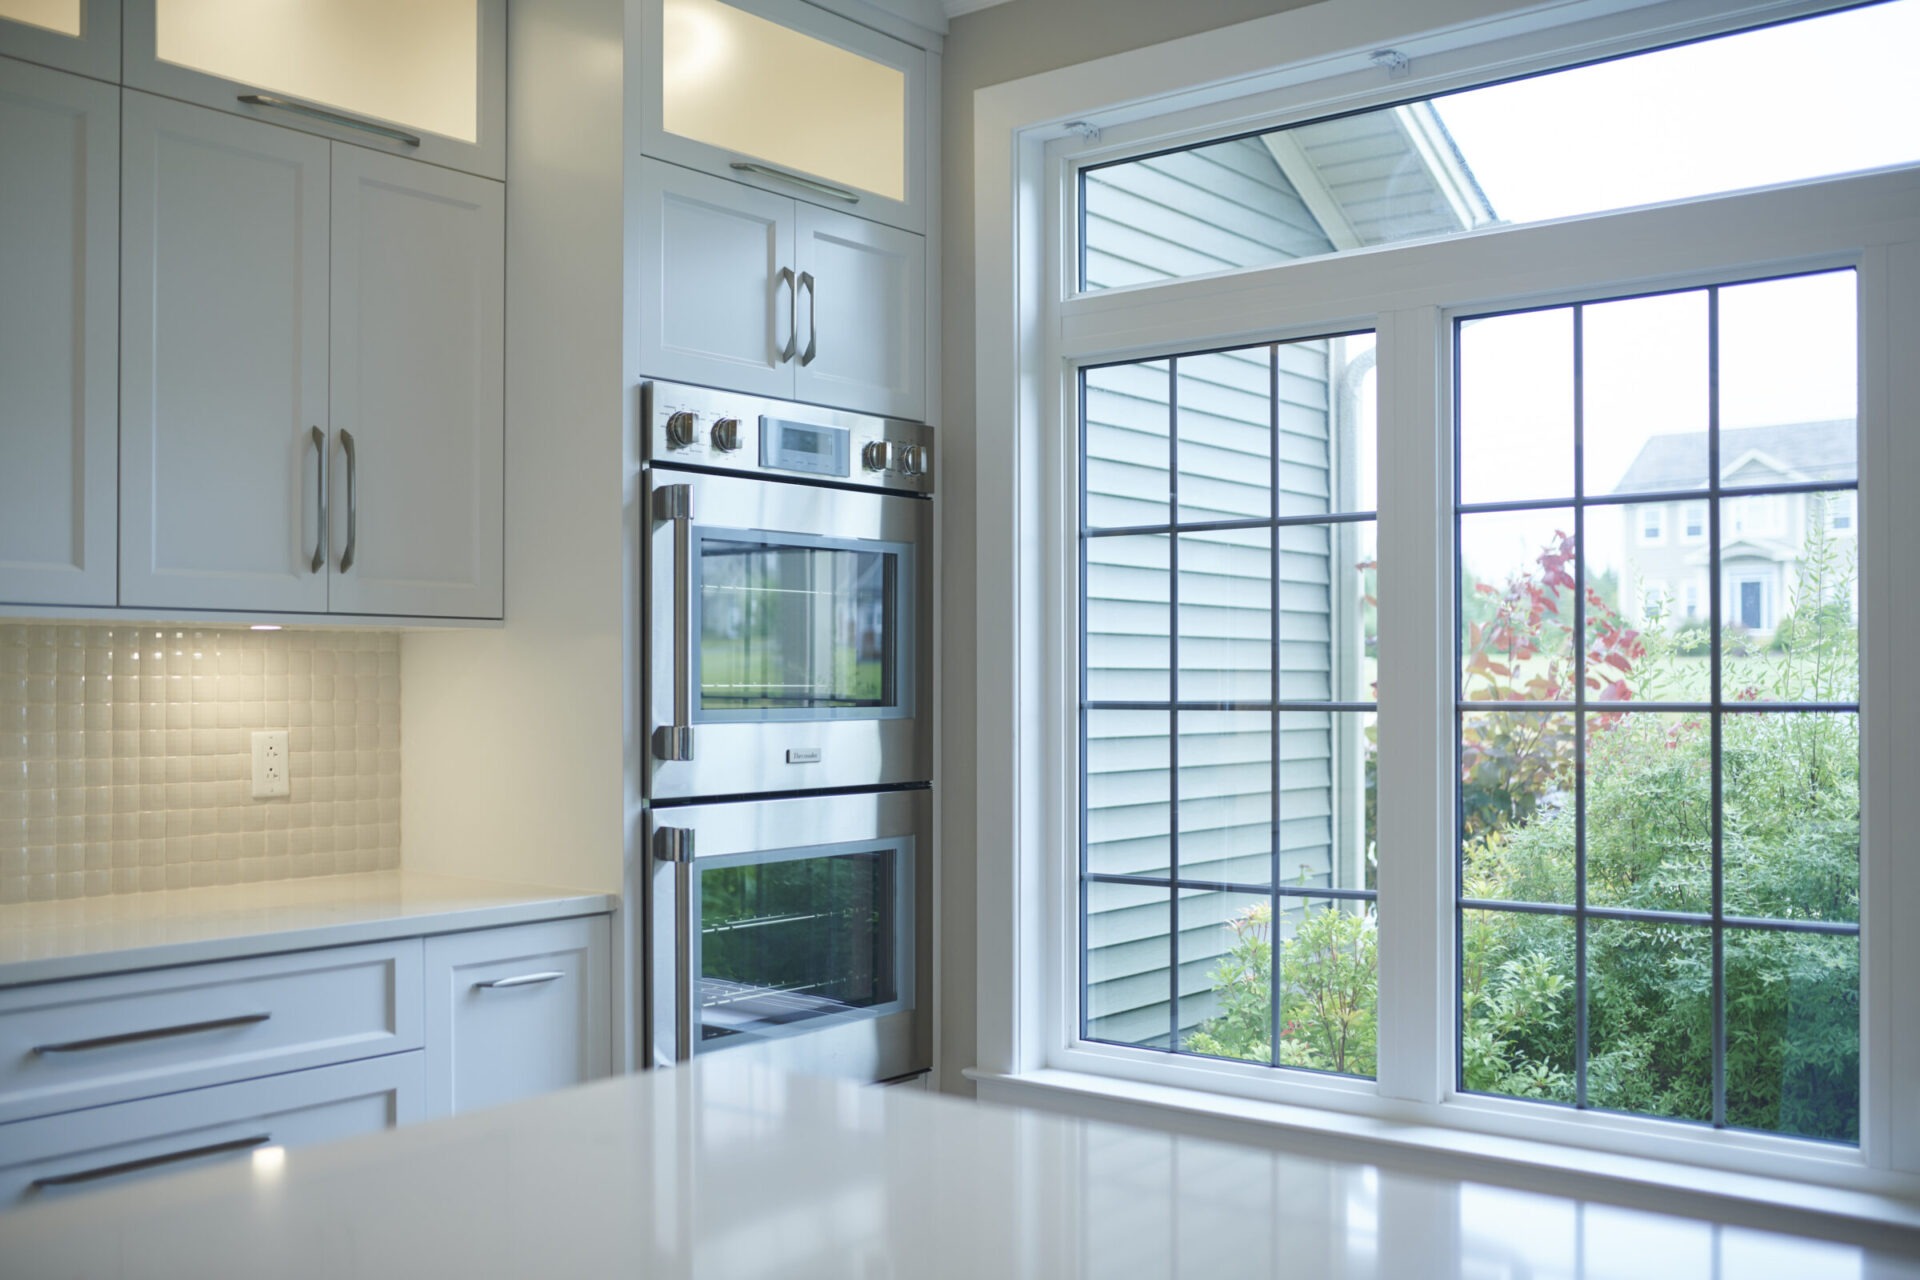 A modern kitchen with white cabinetry, double built-in ovens, and a window offering a view of greenery and neighboring houses. Bright, clean, domestic interior.